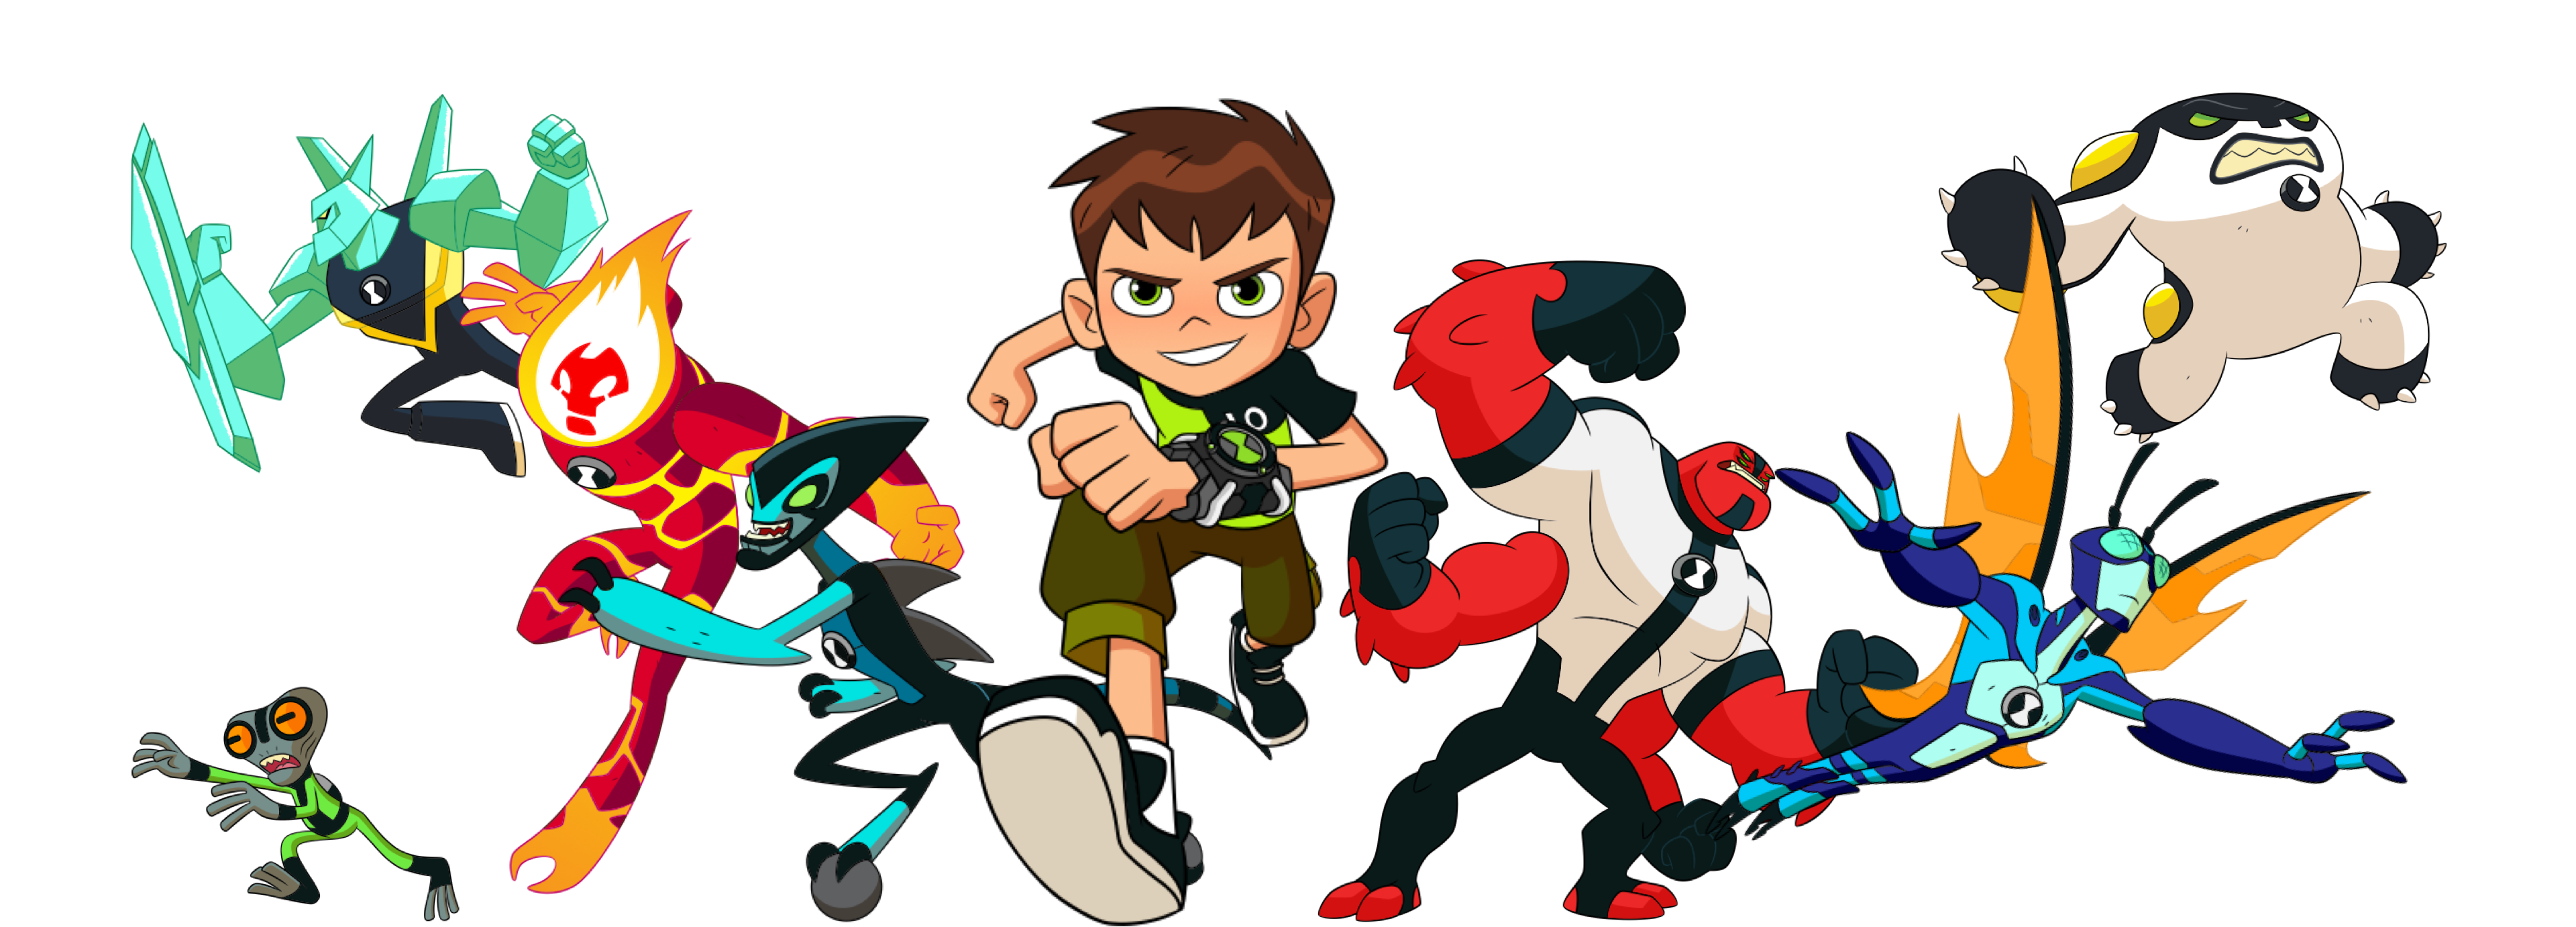 corey whatley recommends Ben 10 Pictures